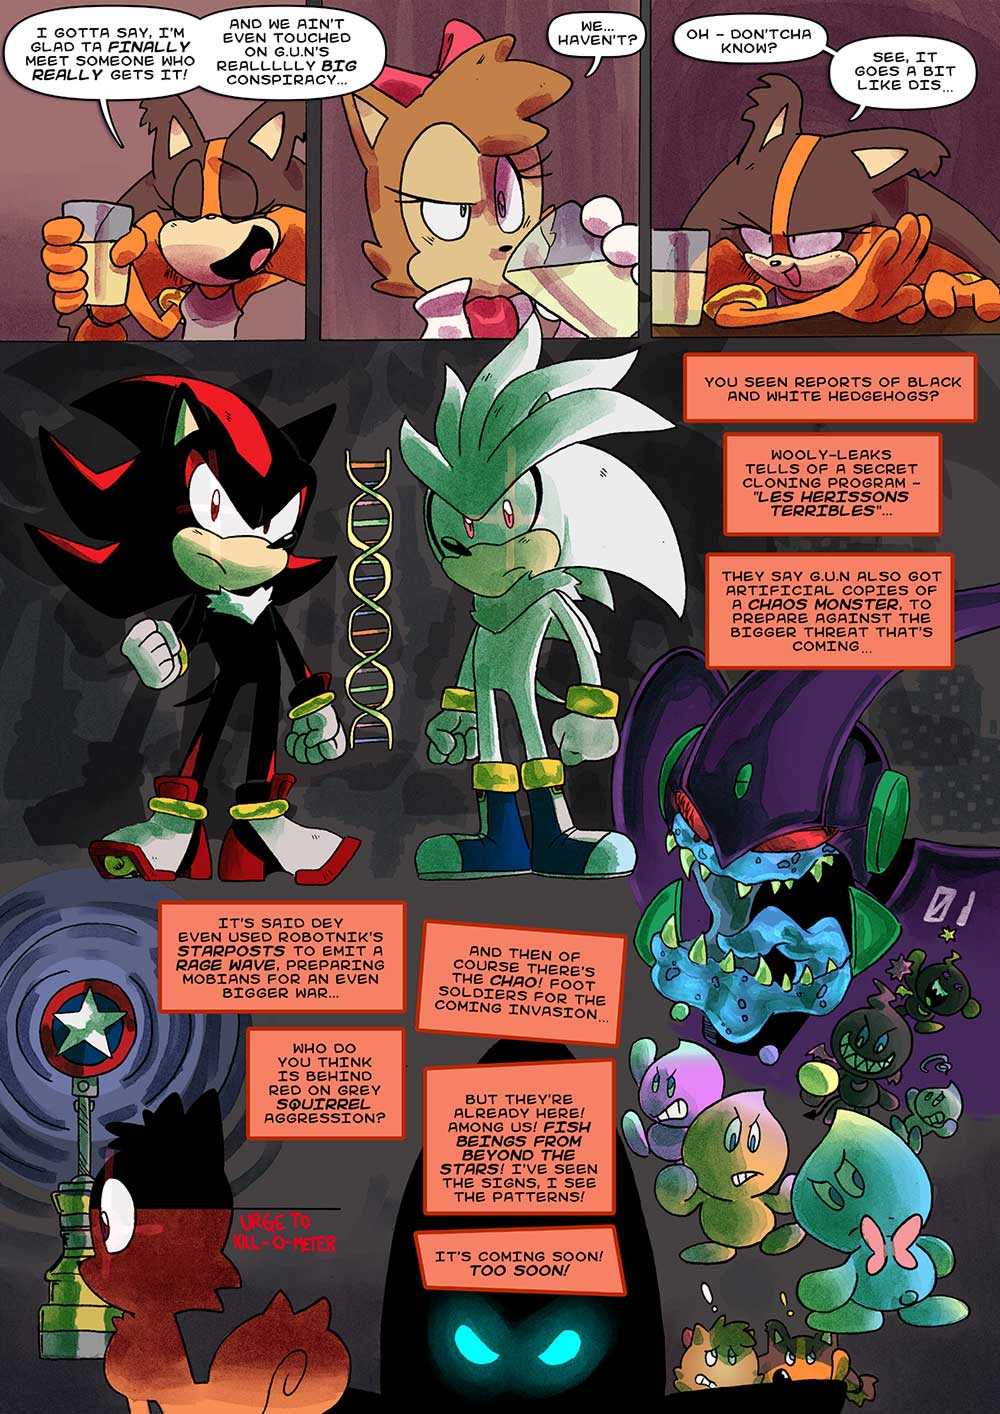 STC #274  Sonic the Comic Online!